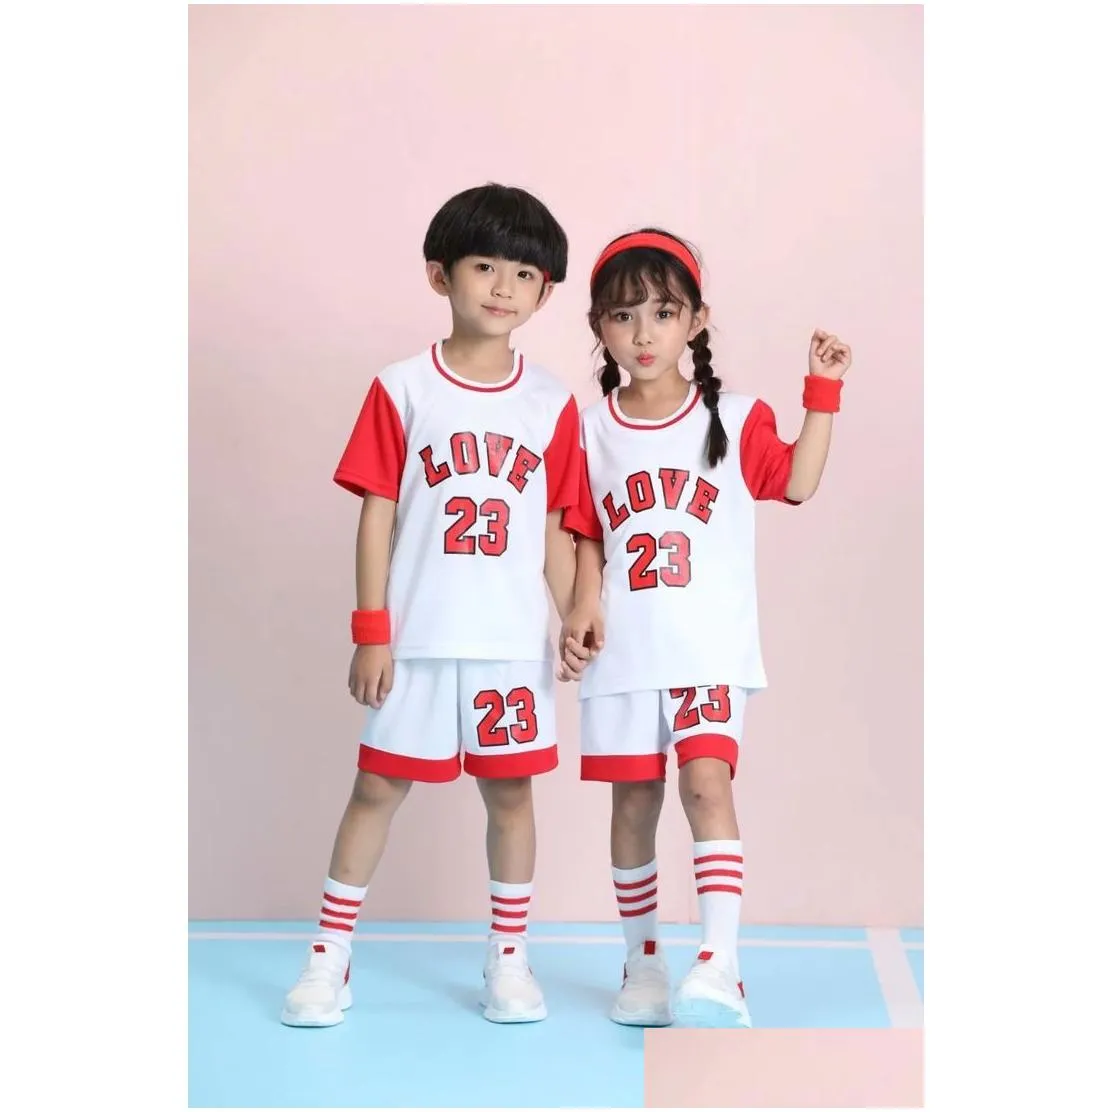 Jerseys Jessie Kicks New Jerseys Sb Kids Ourtdoor G33E Clothing Support Qc Pics Before Shipment Drop Delivery Baby, Kids Maternity Bab Dhs7X